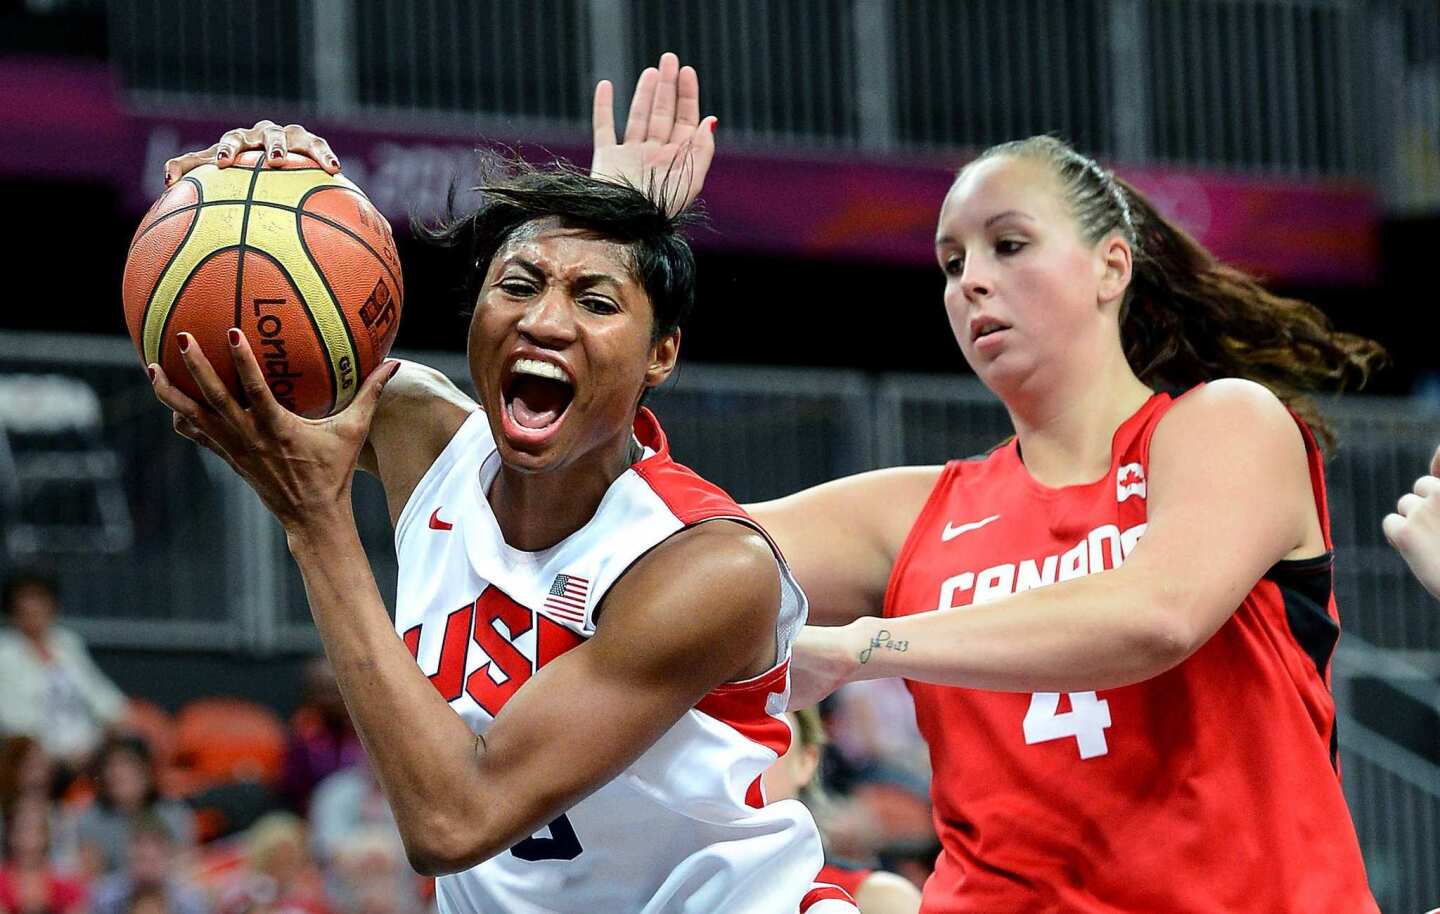 United States' Angel McCoughtry grabs an offensive rebound from Canada's Krita Phillips.